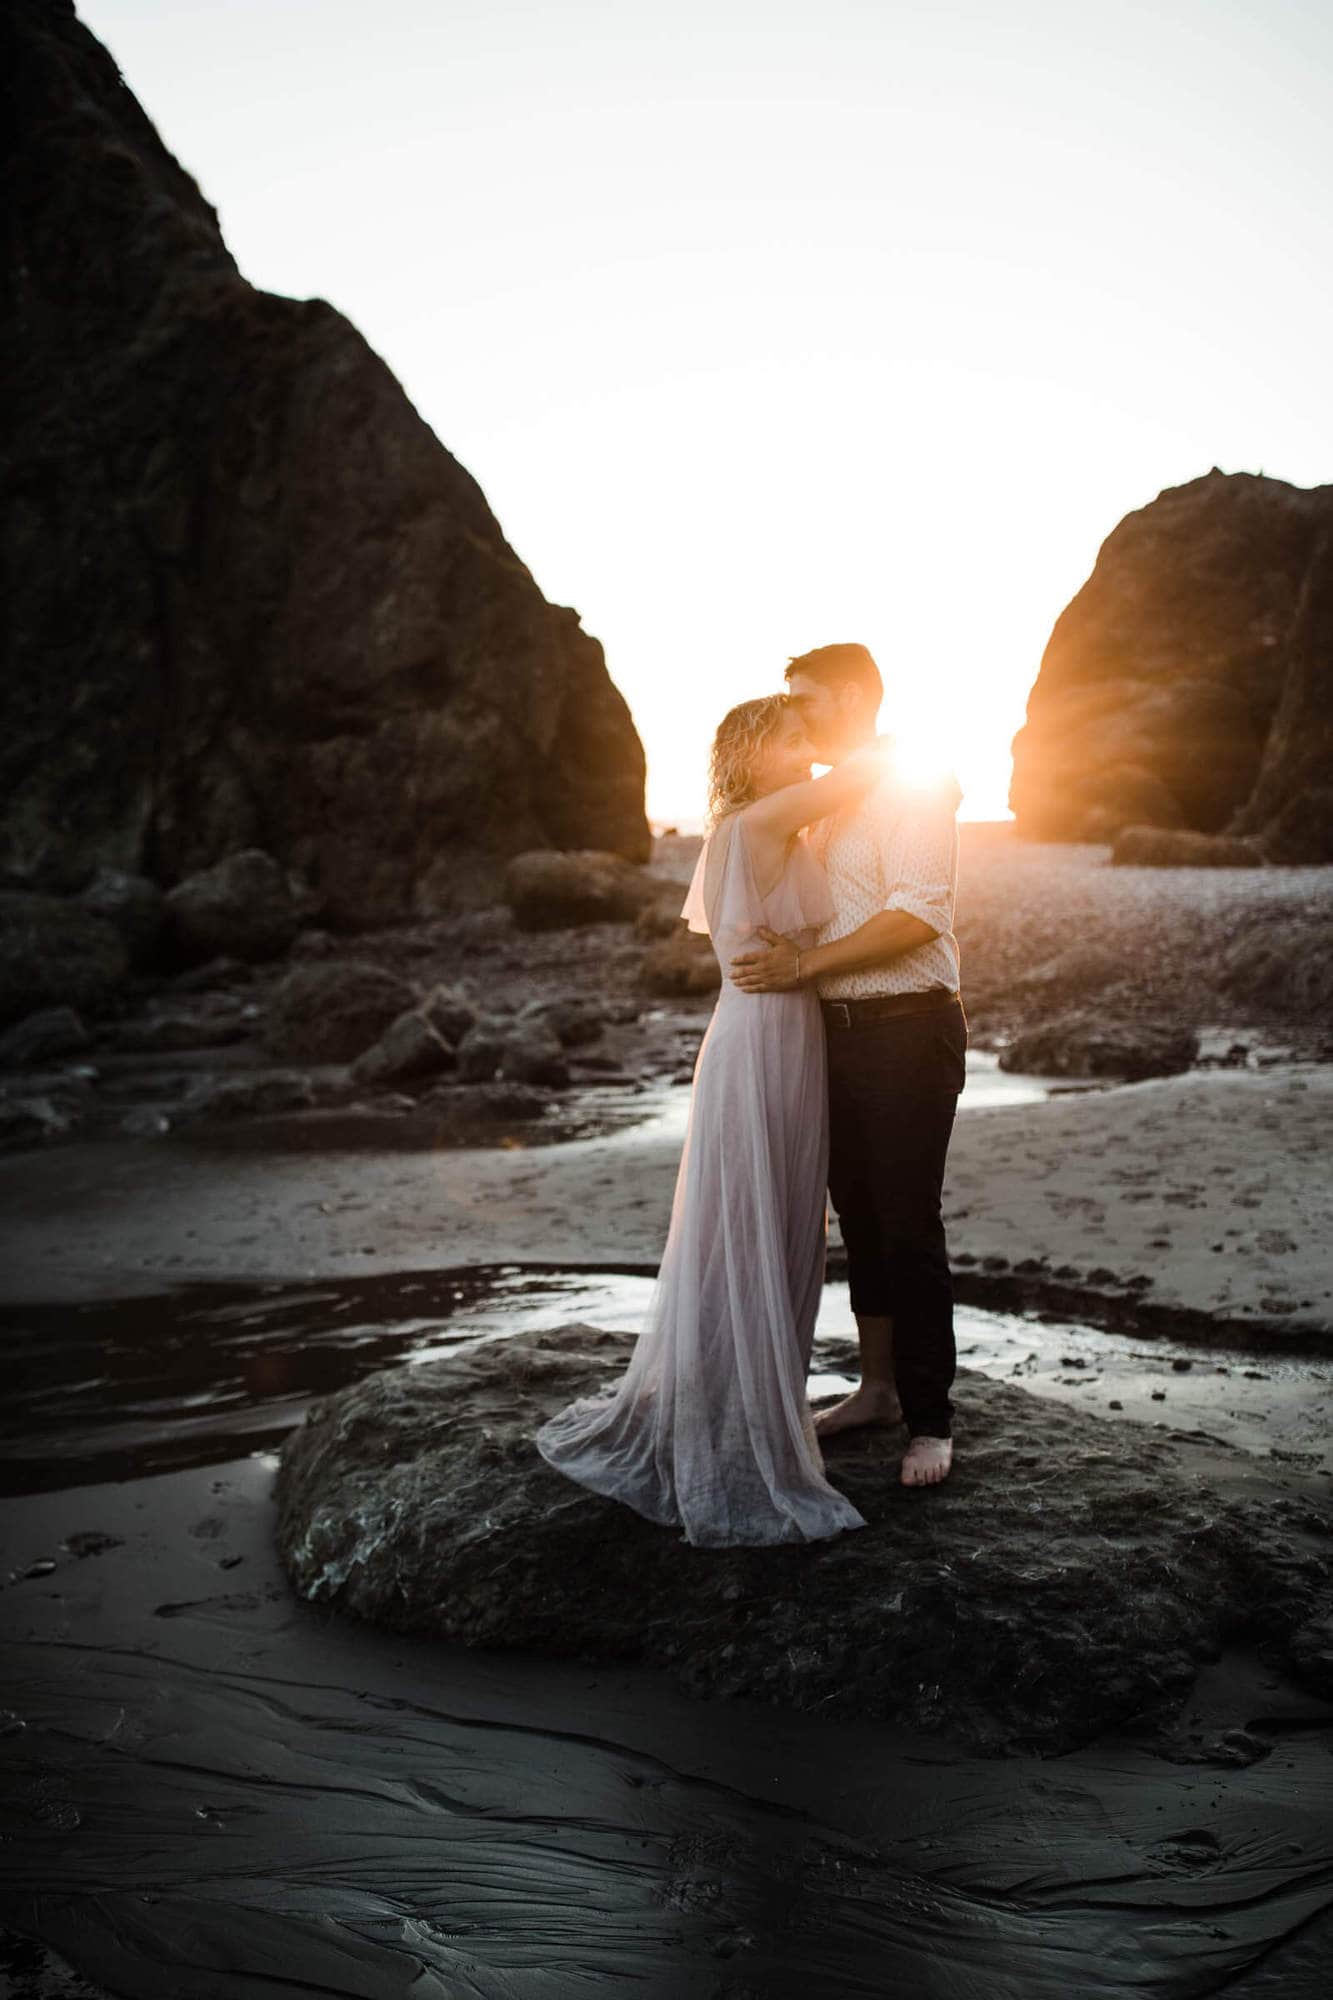 If you're looking for fun, adventure, the rugged PNW coast, and light to DIE for, look no further than this Olympic National Park elopement inspired shoot.